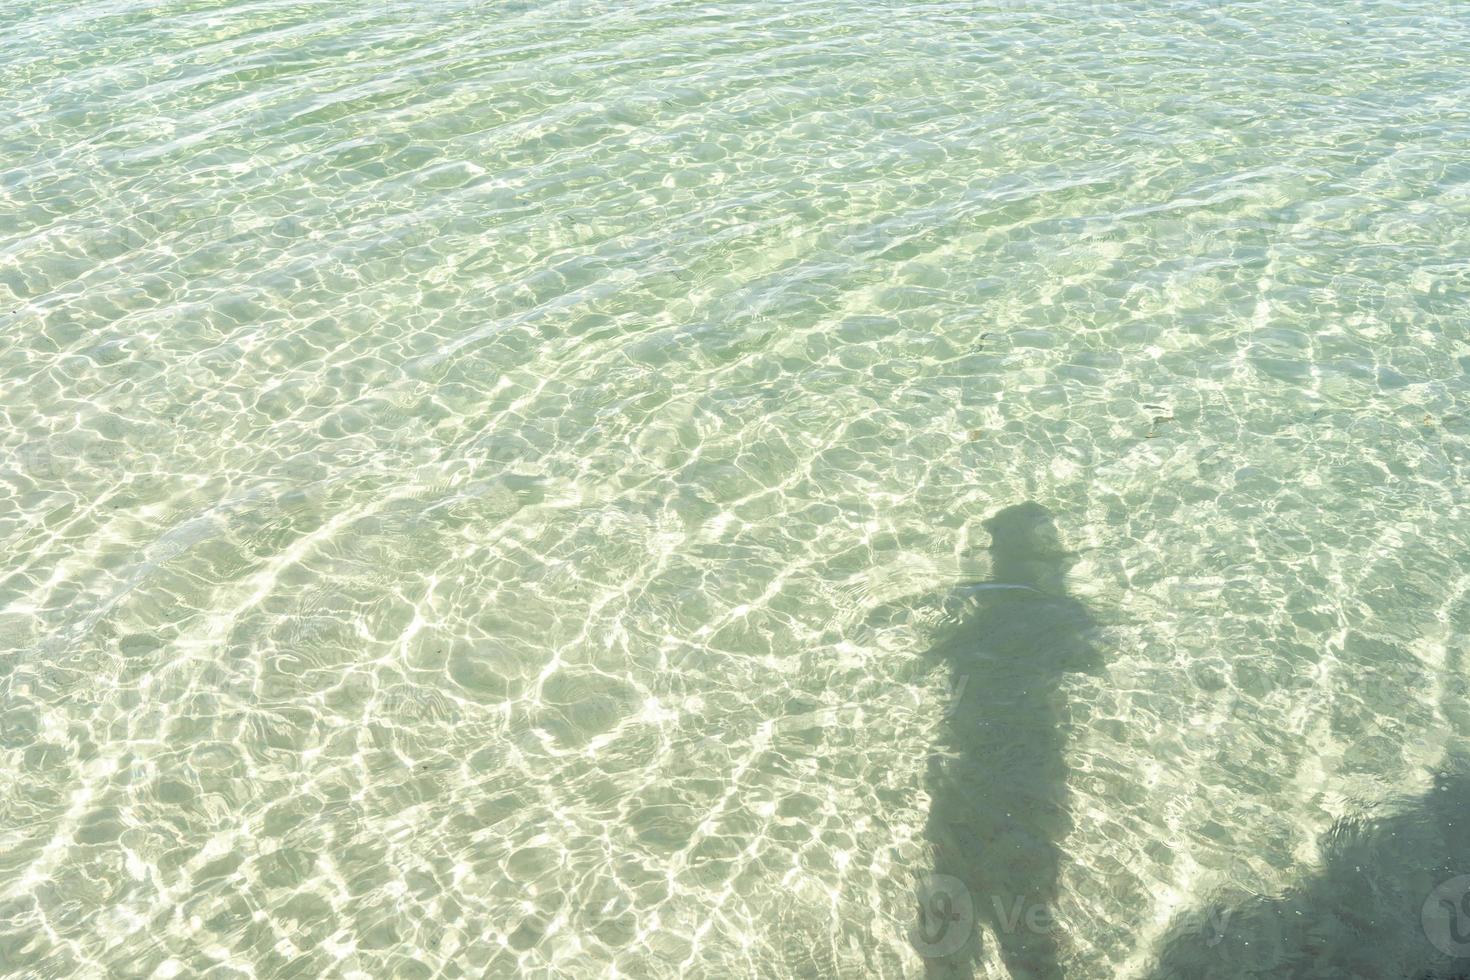 Shadow of person on the sea.Shadow of a photographer taking picture of the beautiful wave at the beach photo